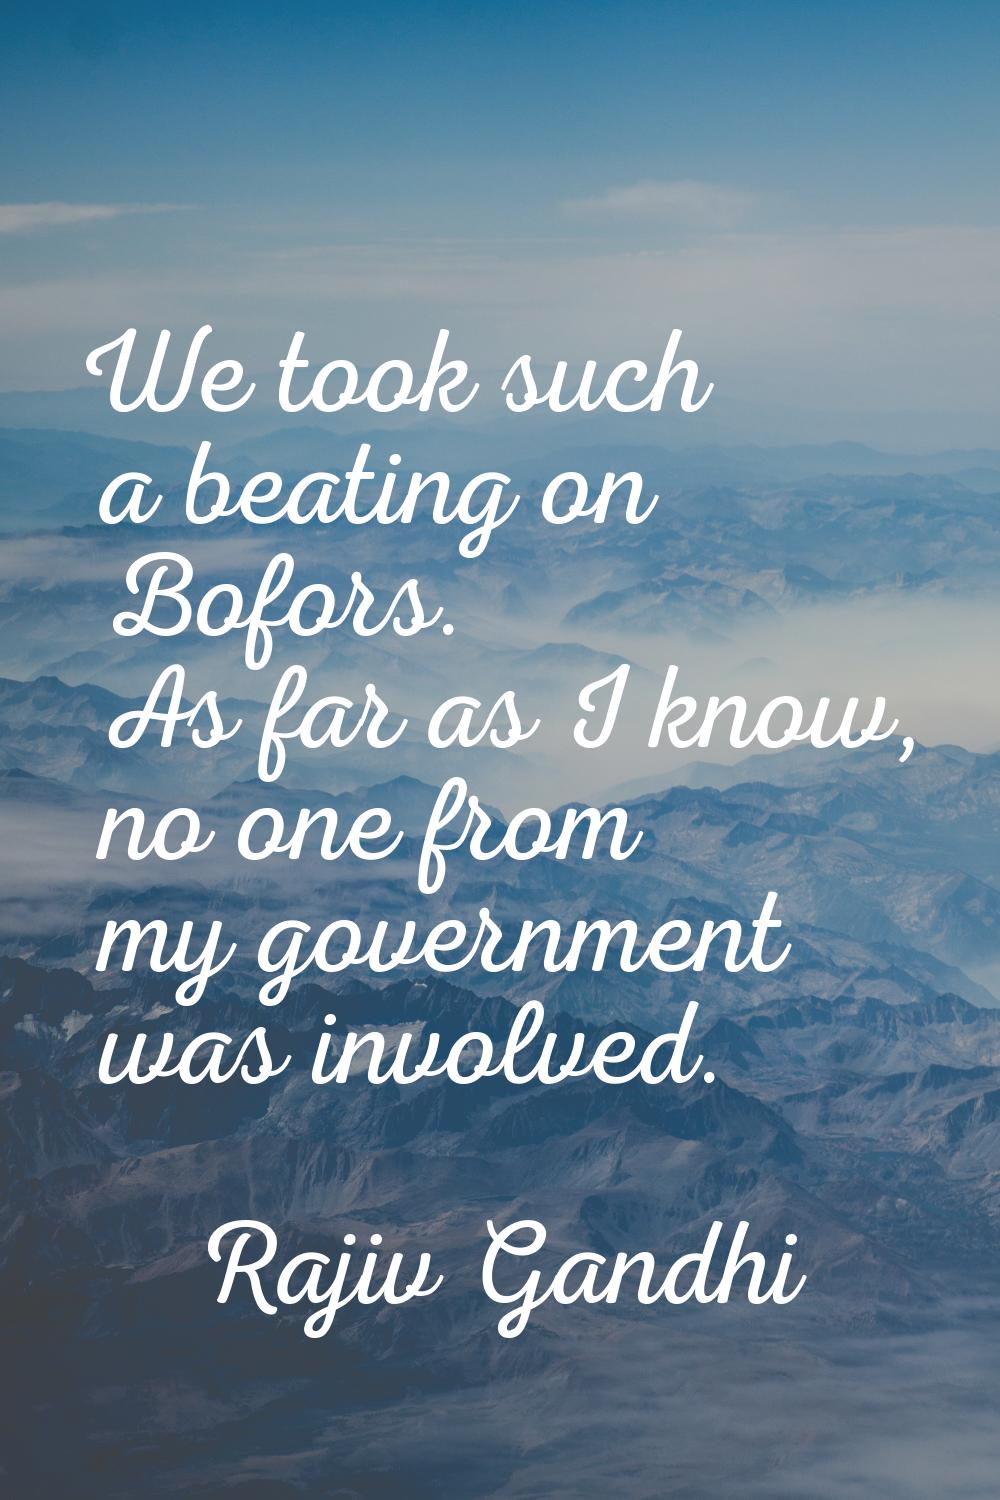 We took such a beating on Bofors. As far as I know, no one from my government was involved.